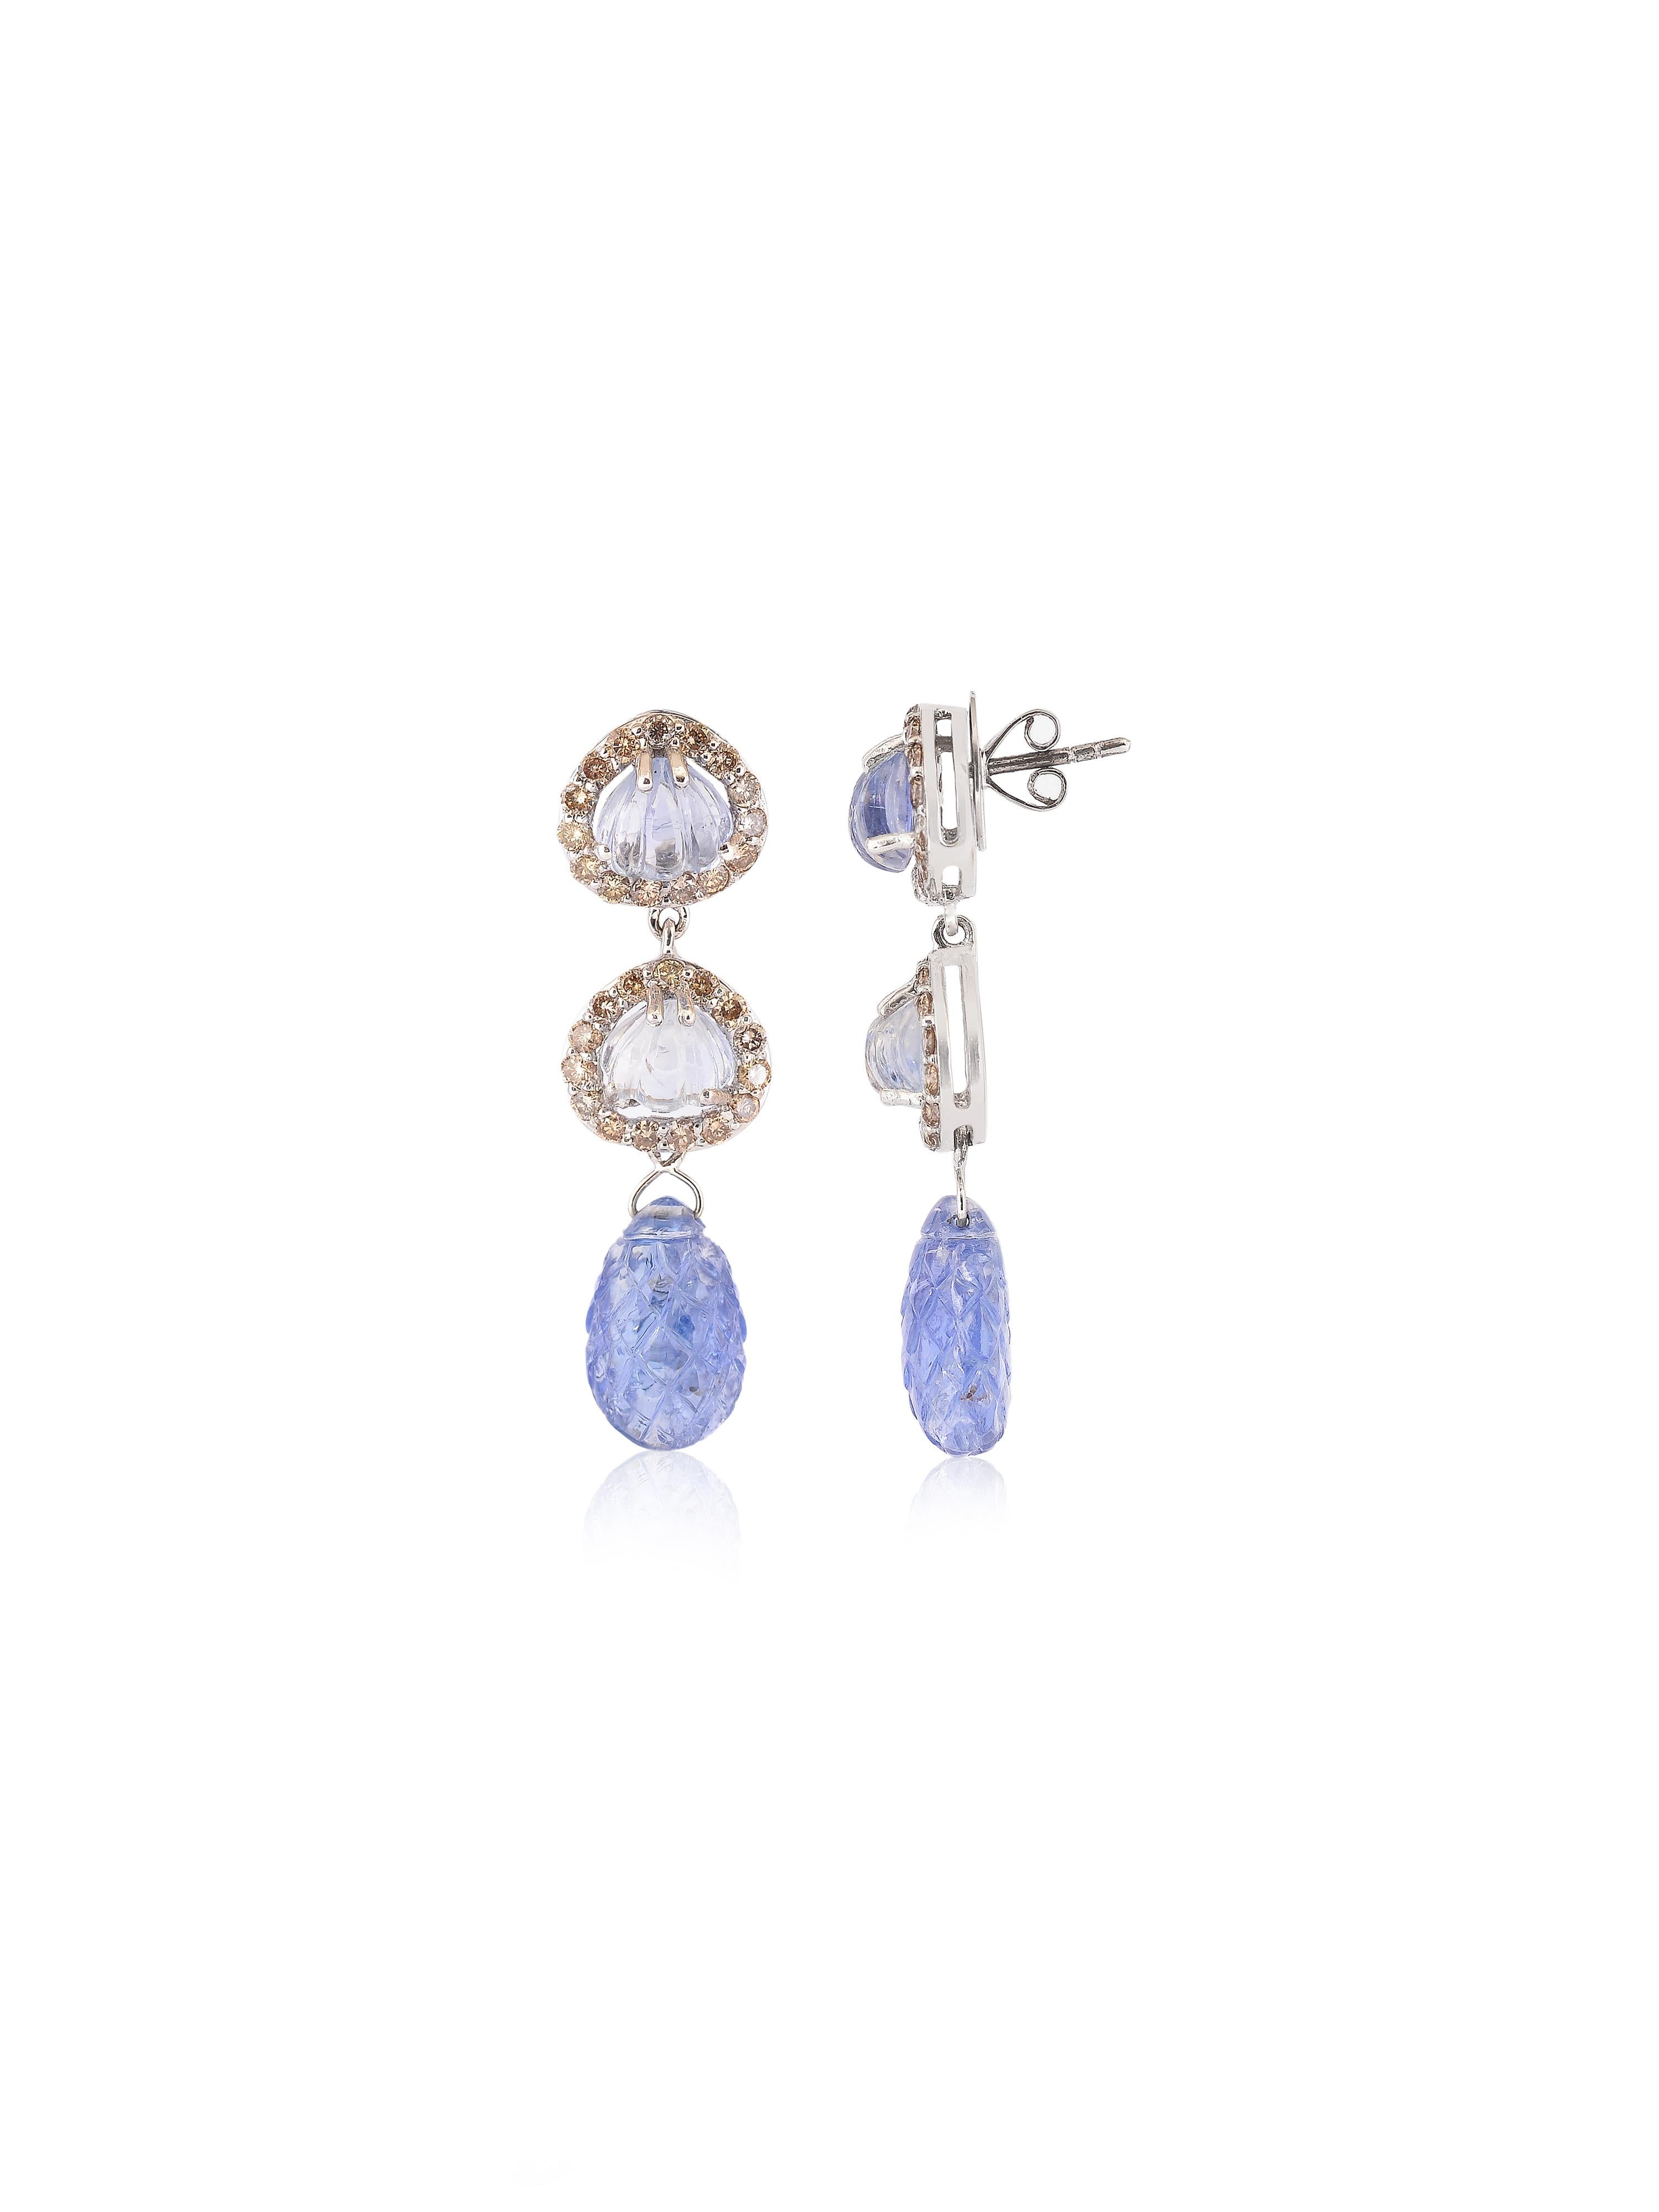 A pair of beautiful earrings with a hand carved natural sapphire drop pair weighing 16.49 carats along with 2 more shell shaped lighter sapphires on top surrounded by a halo of diamonds. 
The elegant dangling earring pair is made in 18K White gold.